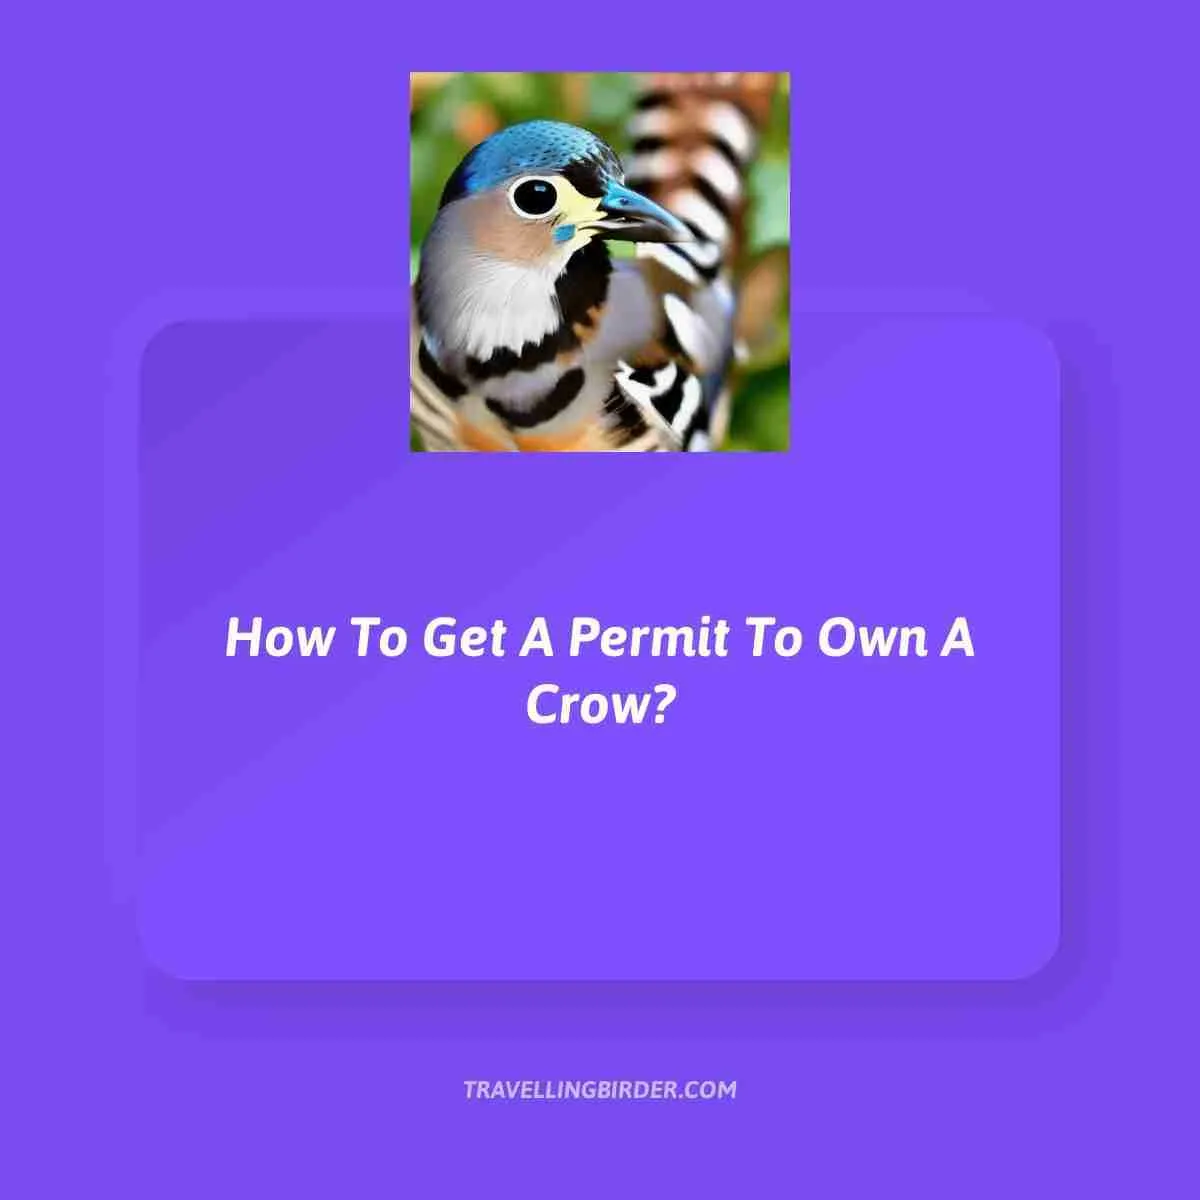 How-To-Get-A-Permit-To-Own-A-Crow